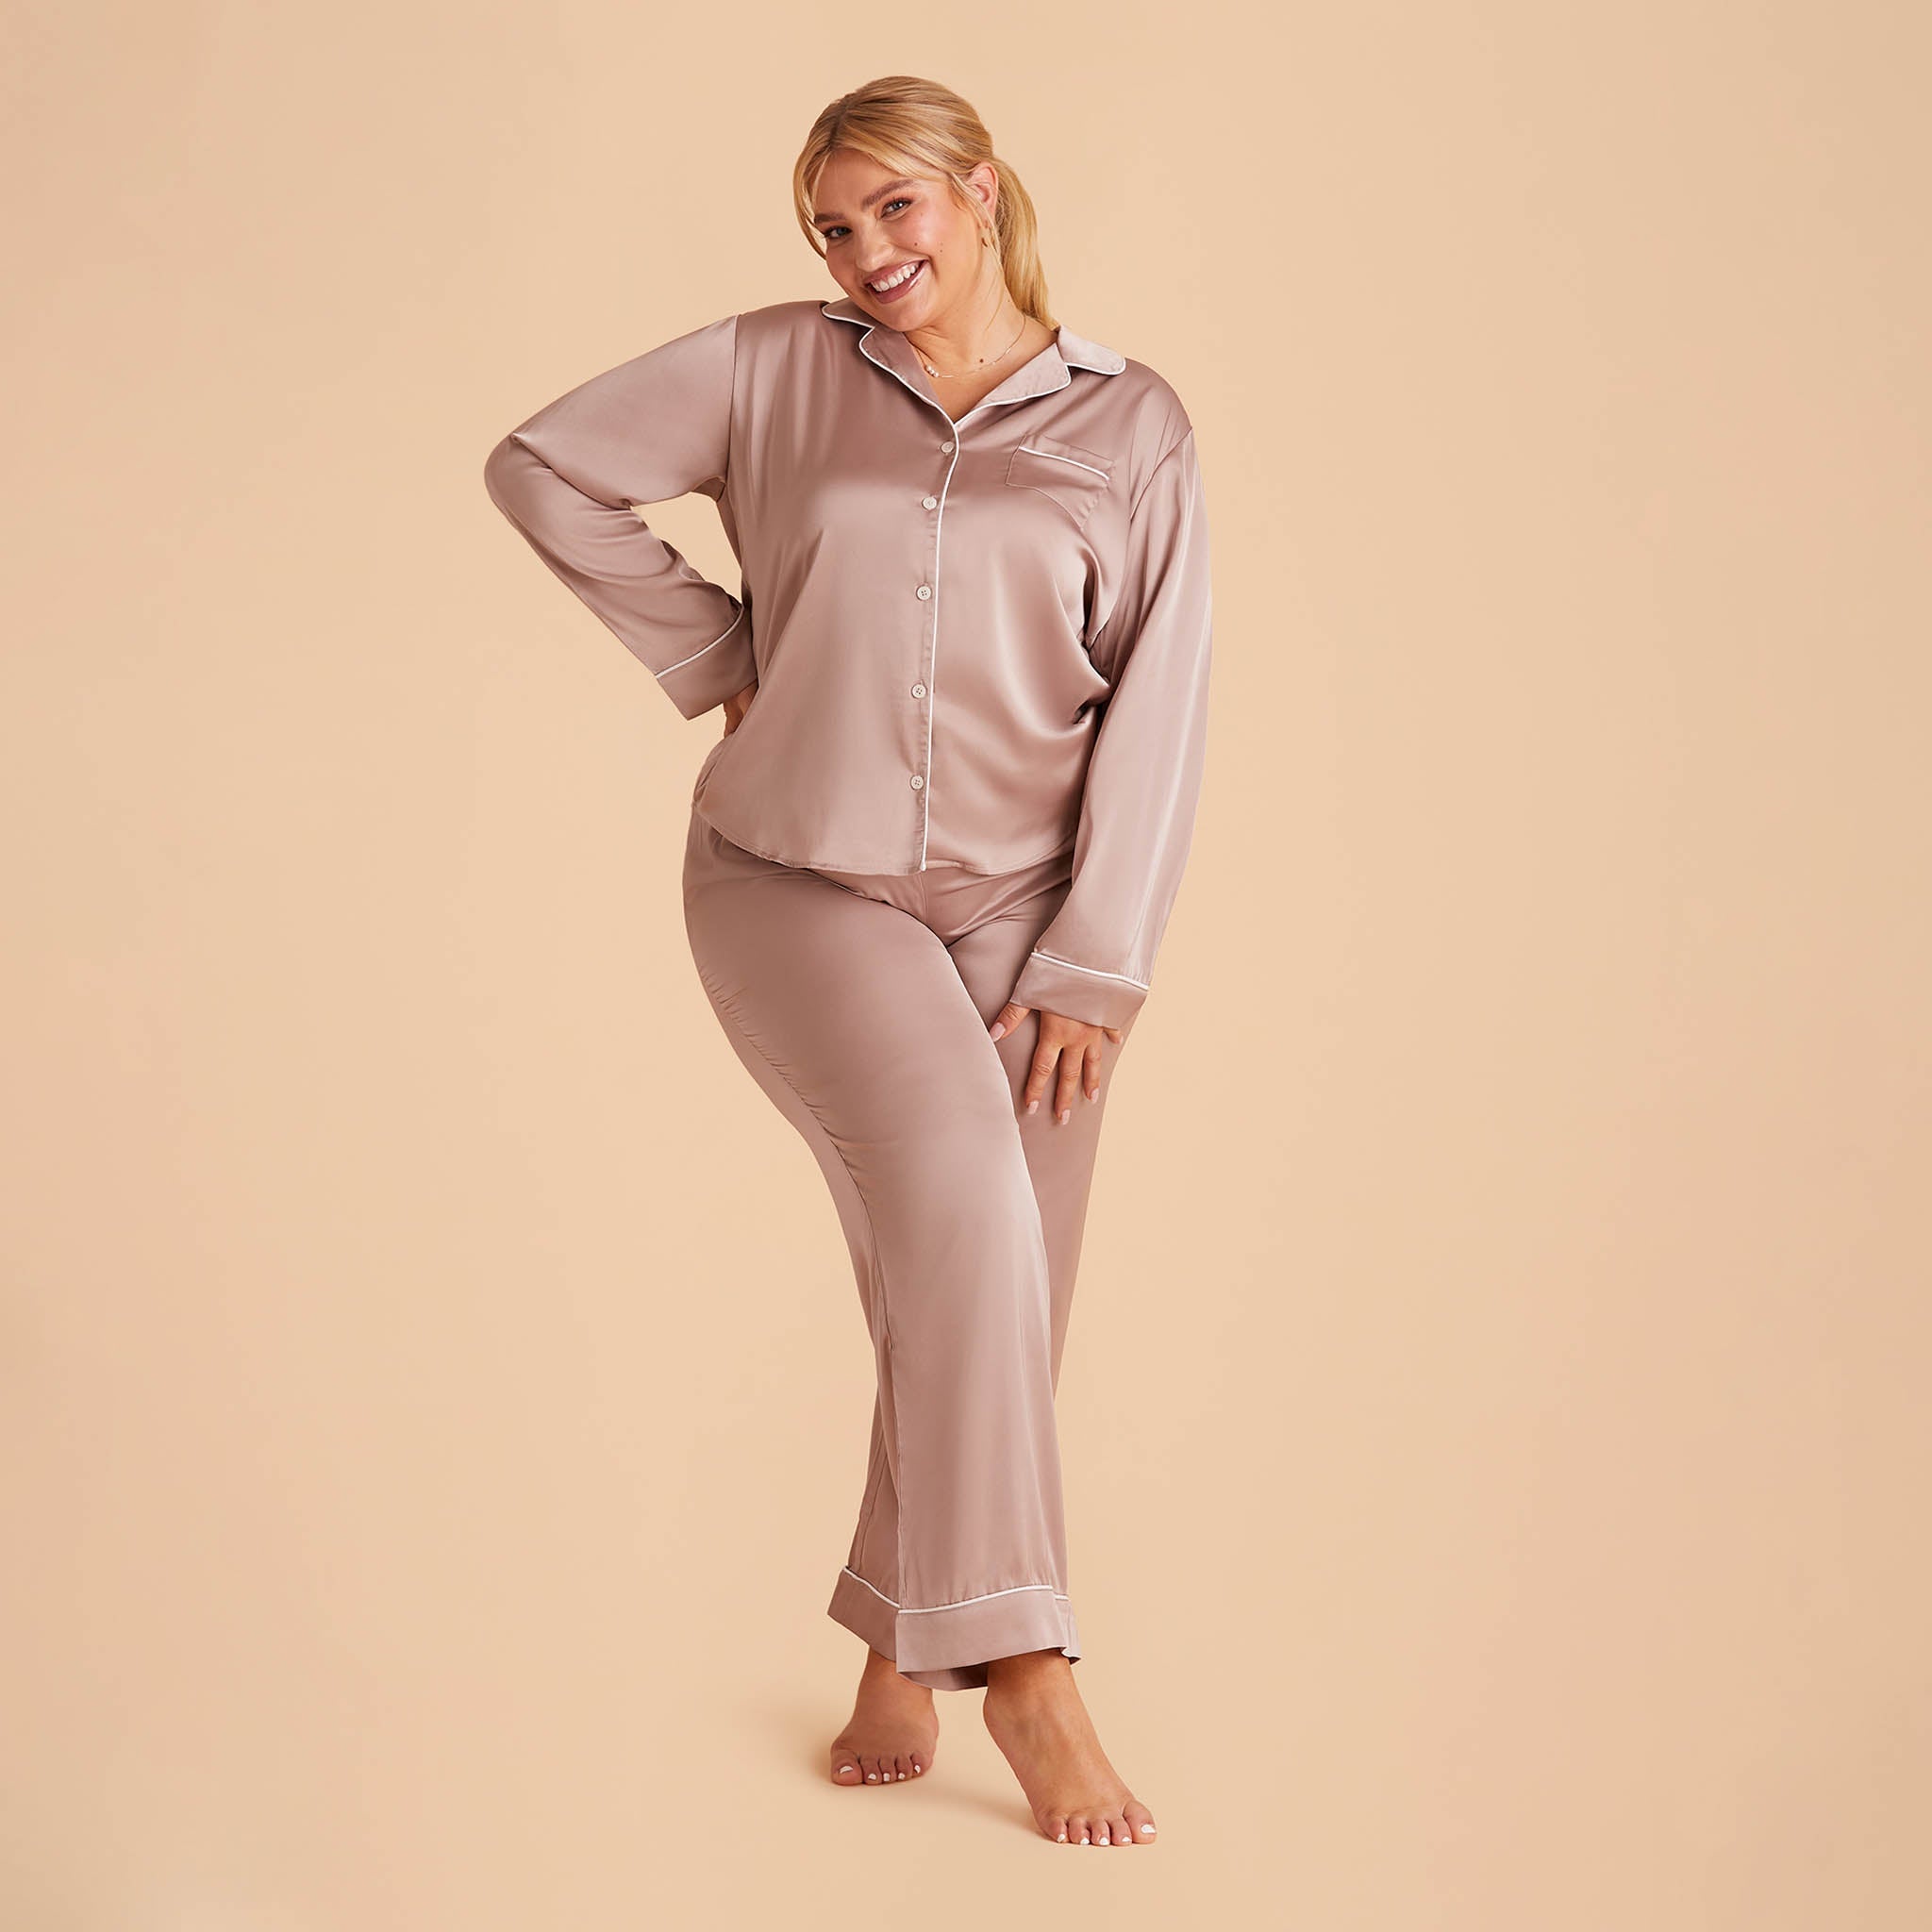 Jonny Plus Size Satin Long Sleeve Pajama Top With White Piping in mauve taupe, front view